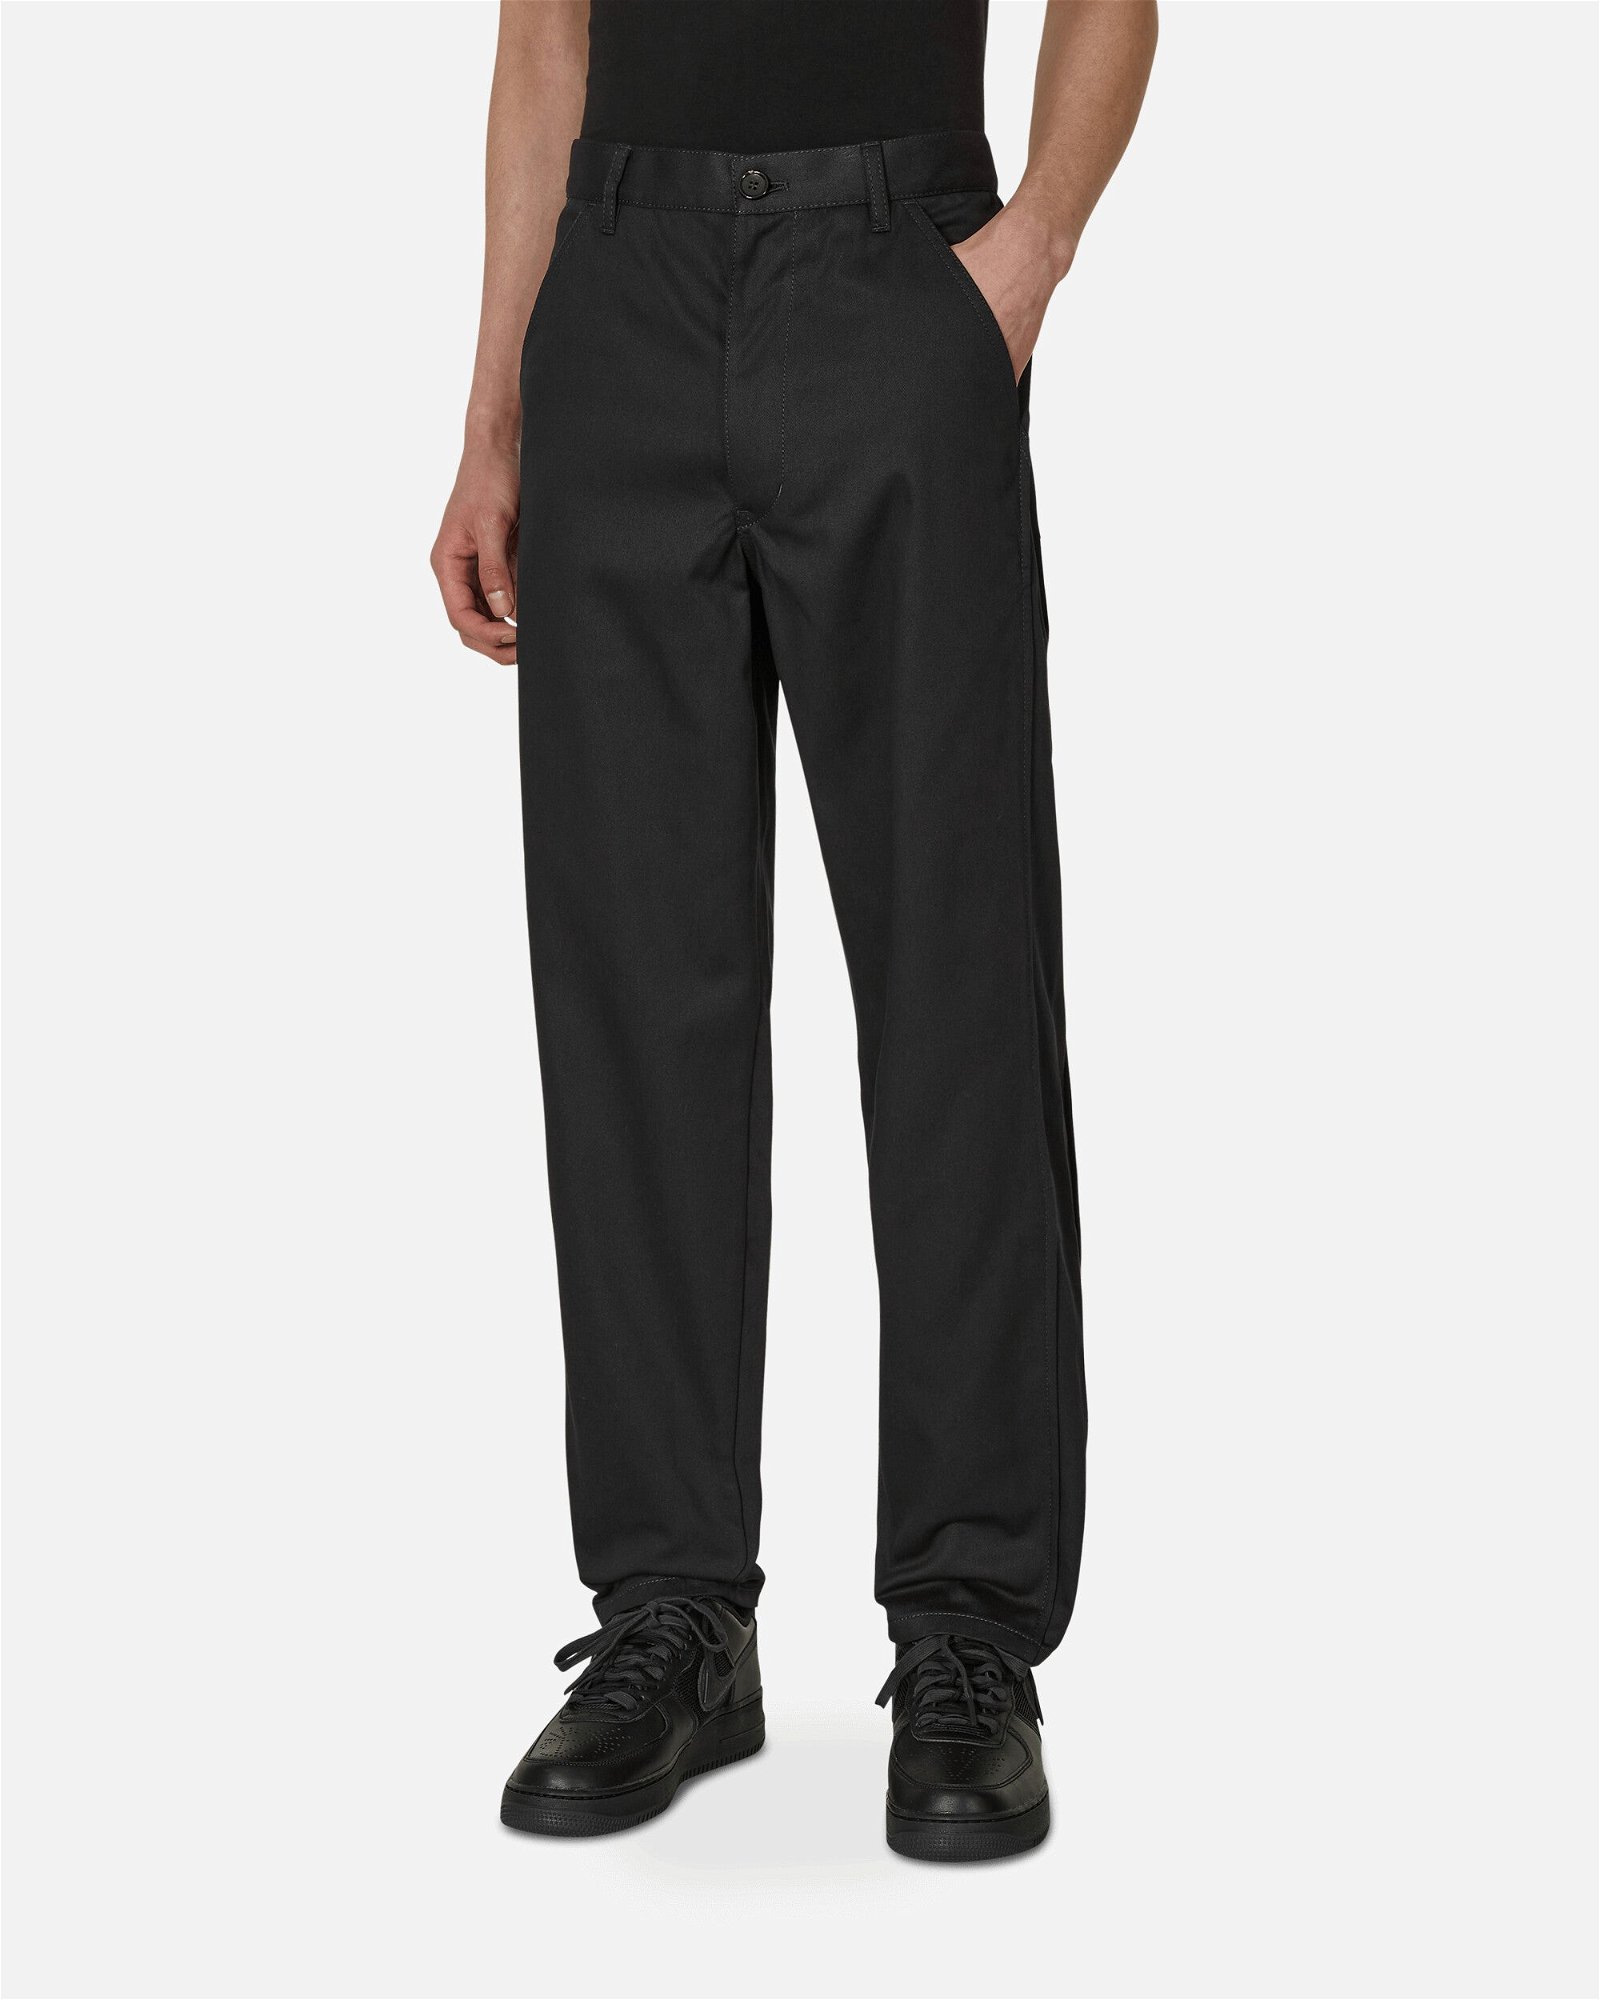 Twill Trousers - Buy Twill Trousers online in India